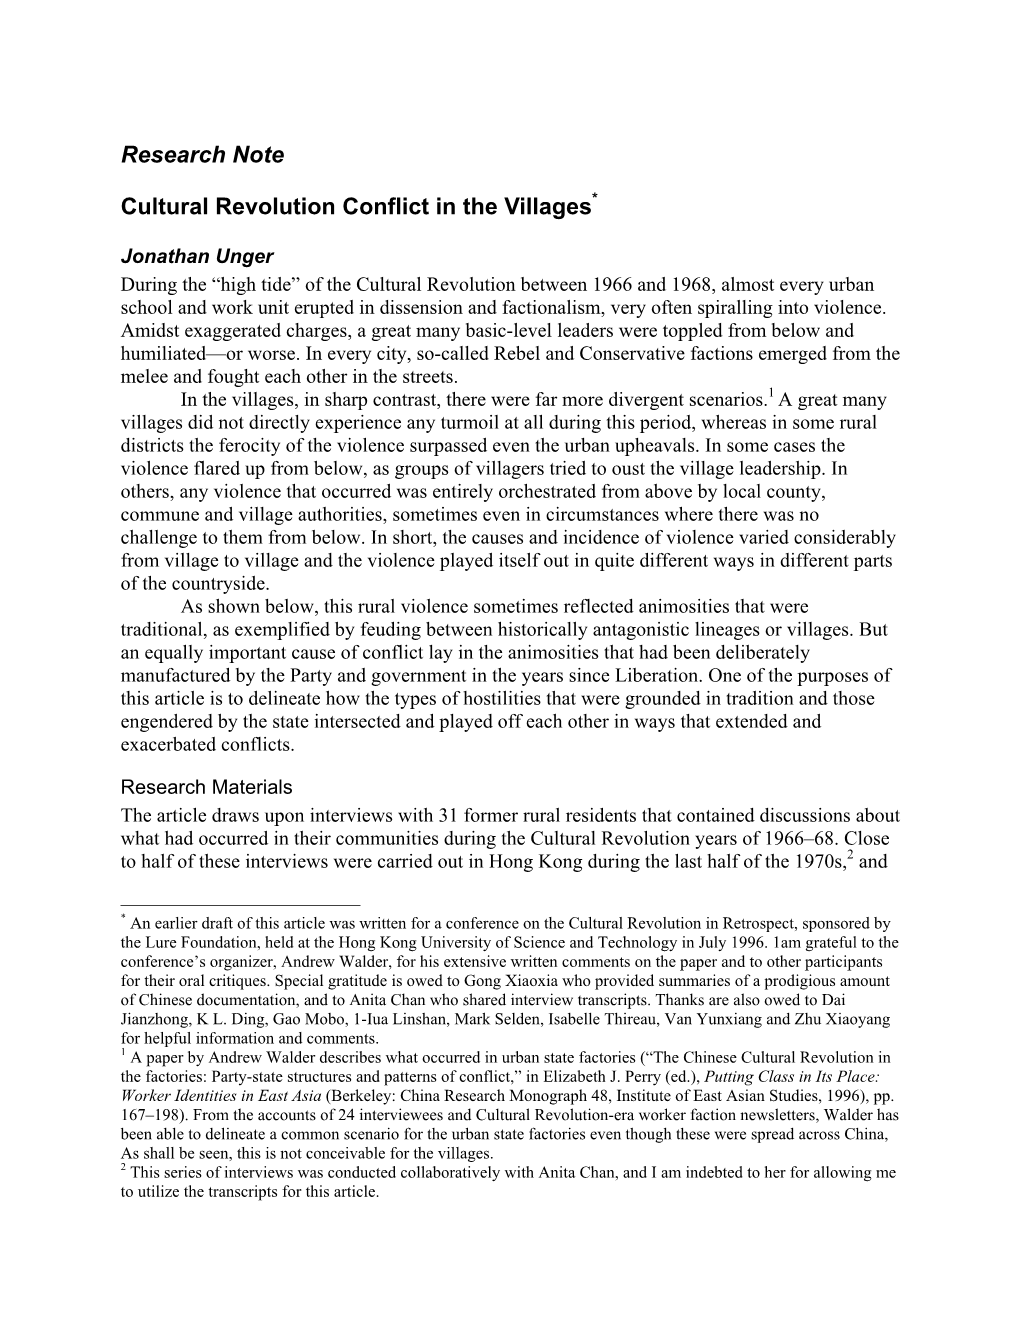 Research Note Cultural Revolution Conflict in the Villages